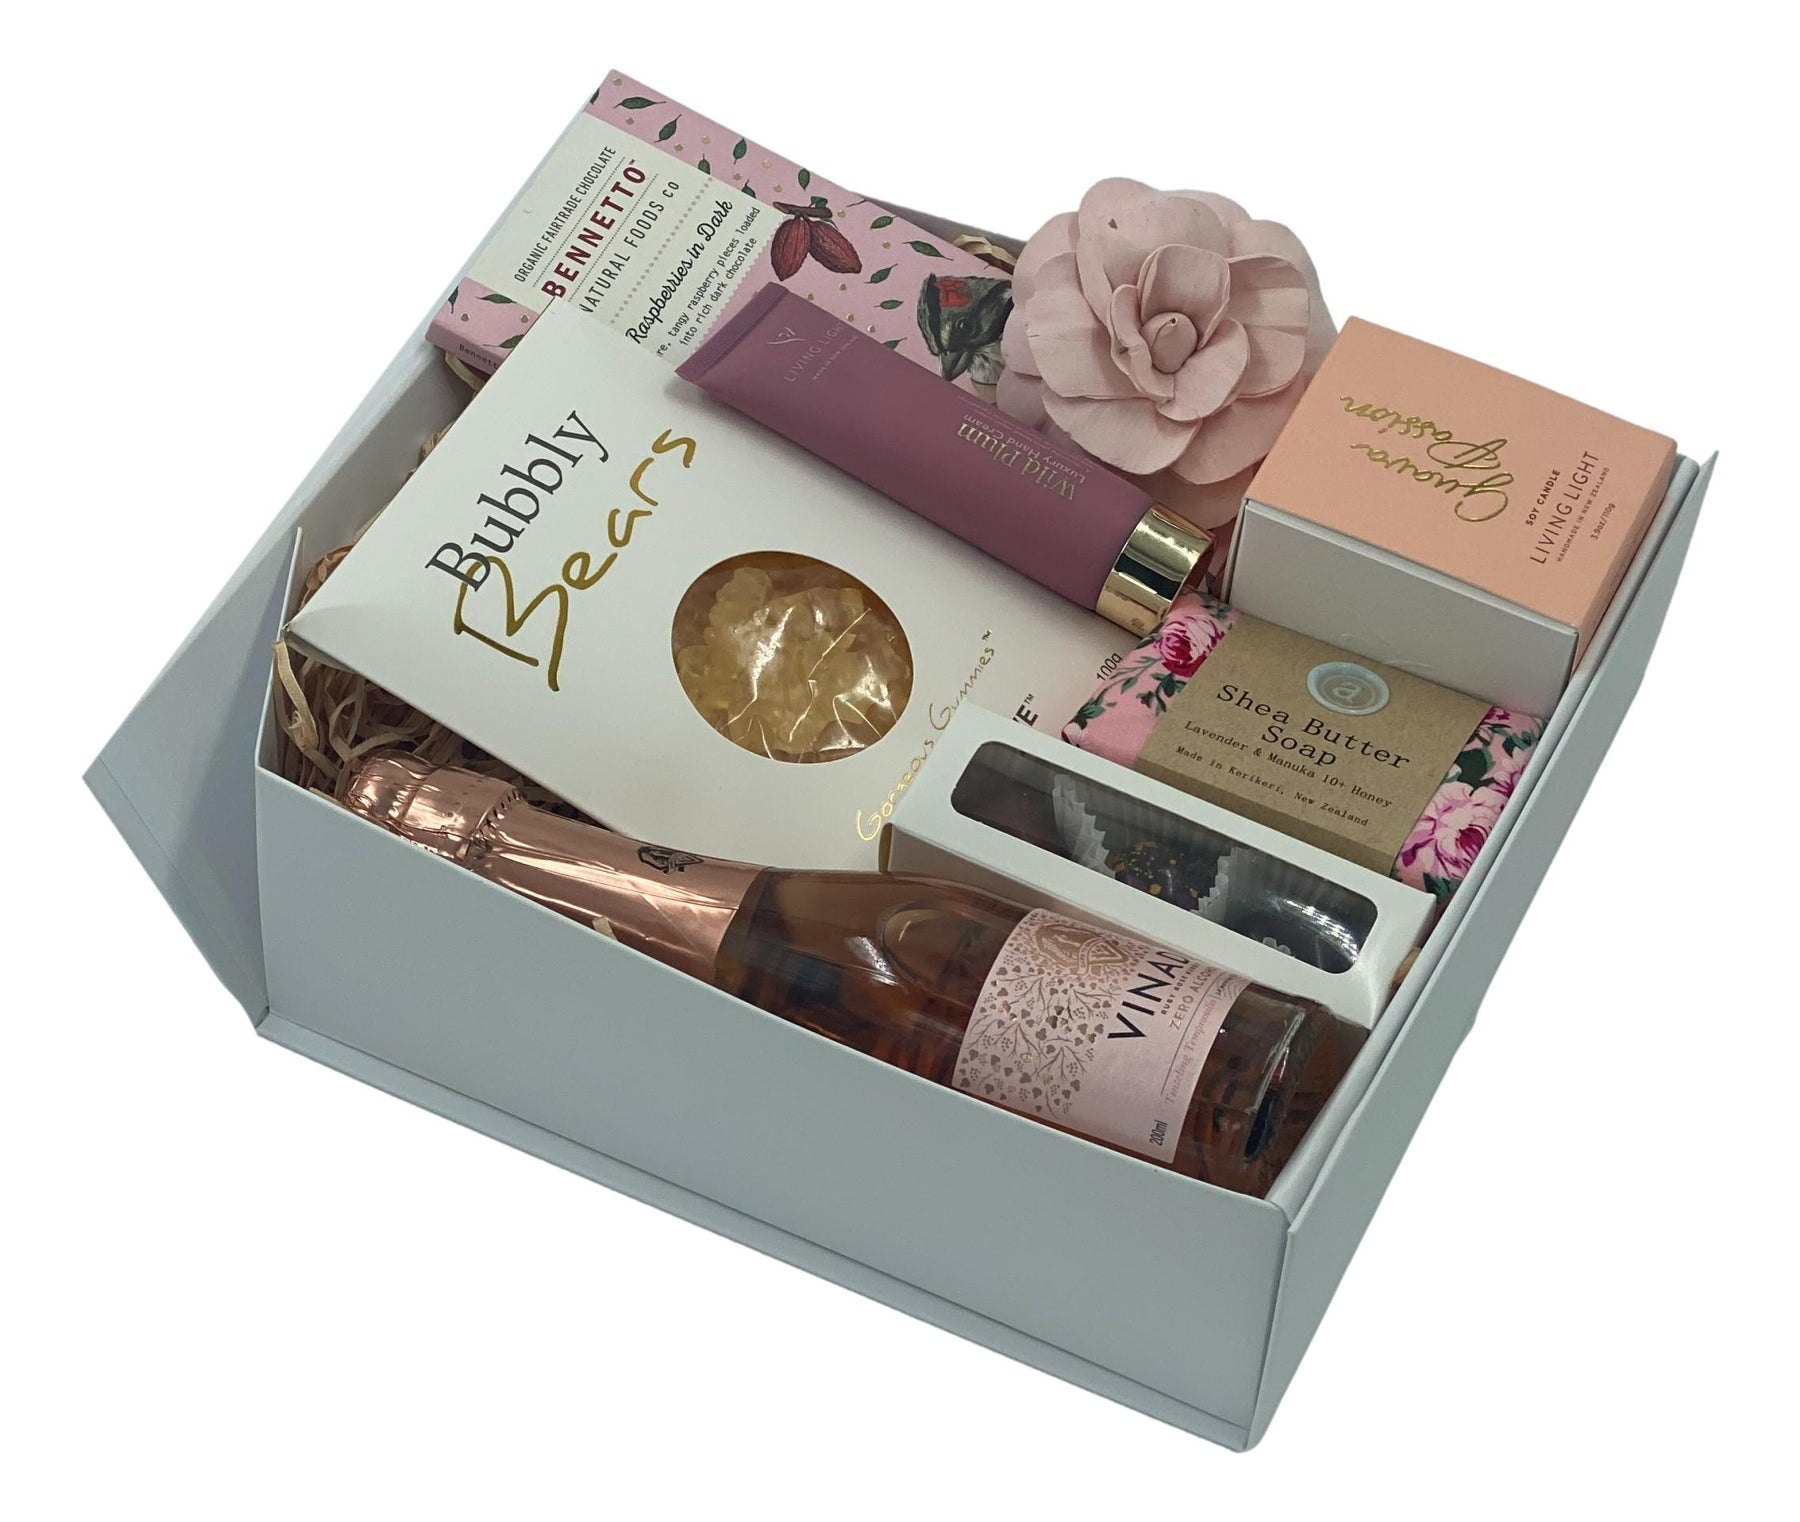 Pamper Mum This Mother's Day With A Luxurious Stunning New Zealand Gift Box